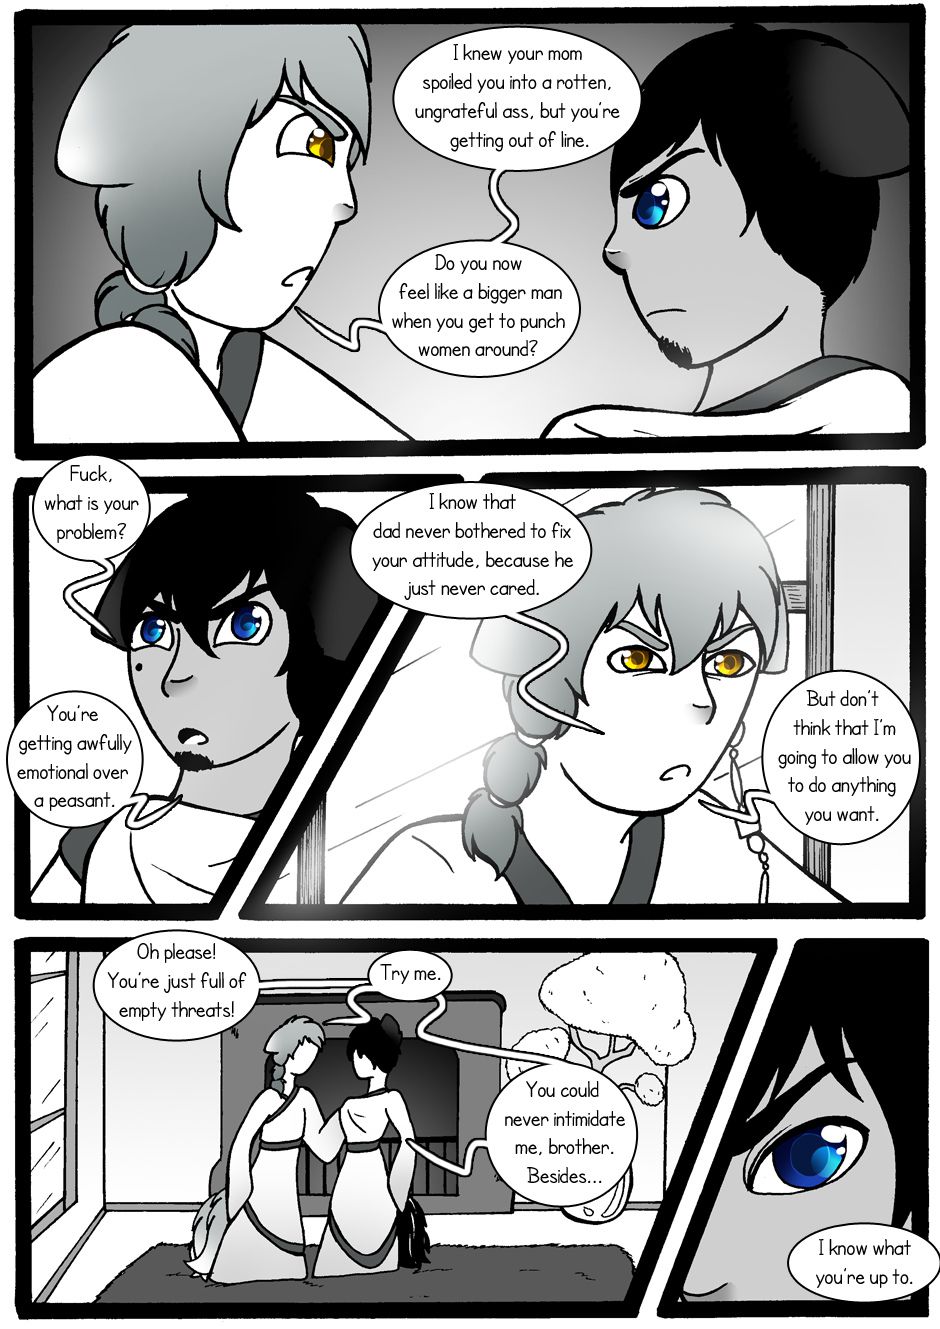 [Jeny-jen94] Between Kings and Queens [Ongoing] 107